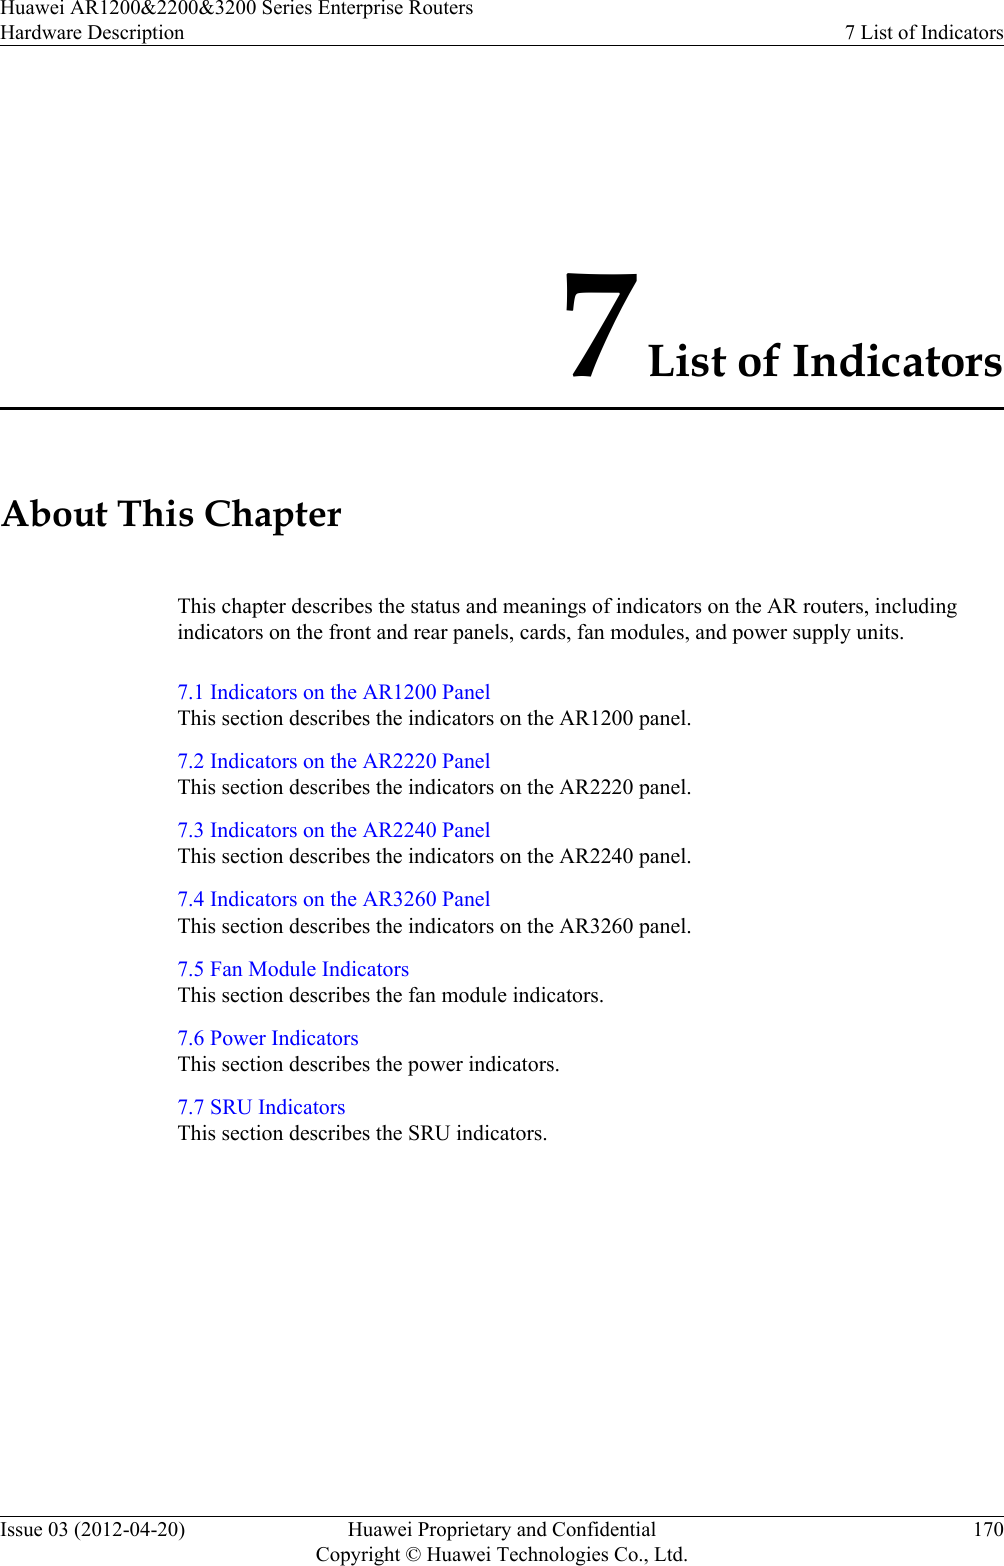 7 List of IndicatorsAbout This ChapterThis chapter describes the status and meanings of indicators on the AR routers, includingindicators on the front and rear panels, cards, fan modules, and power supply units.7.1 Indicators on the AR1200 PanelThis section describes the indicators on the AR1200 panel.7.2 Indicators on the AR2220 PanelThis section describes the indicators on the AR2220 panel.7.3 Indicators on the AR2240 PanelThis section describes the indicators on the AR2240 panel.7.4 Indicators on the AR3260 PanelThis section describes the indicators on the AR3260 panel.7.5 Fan Module IndicatorsThis section describes the fan module indicators.7.6 Power IndicatorsThis section describes the power indicators.7.7 SRU IndicatorsThis section describes the SRU indicators.Huawei AR1200&amp;2200&amp;3200 Series Enterprise RoutersHardware Description 7 List of IndicatorsIssue 03 (2012-04-20) Huawei Proprietary and ConfidentialCopyright © Huawei Technologies Co., Ltd.170